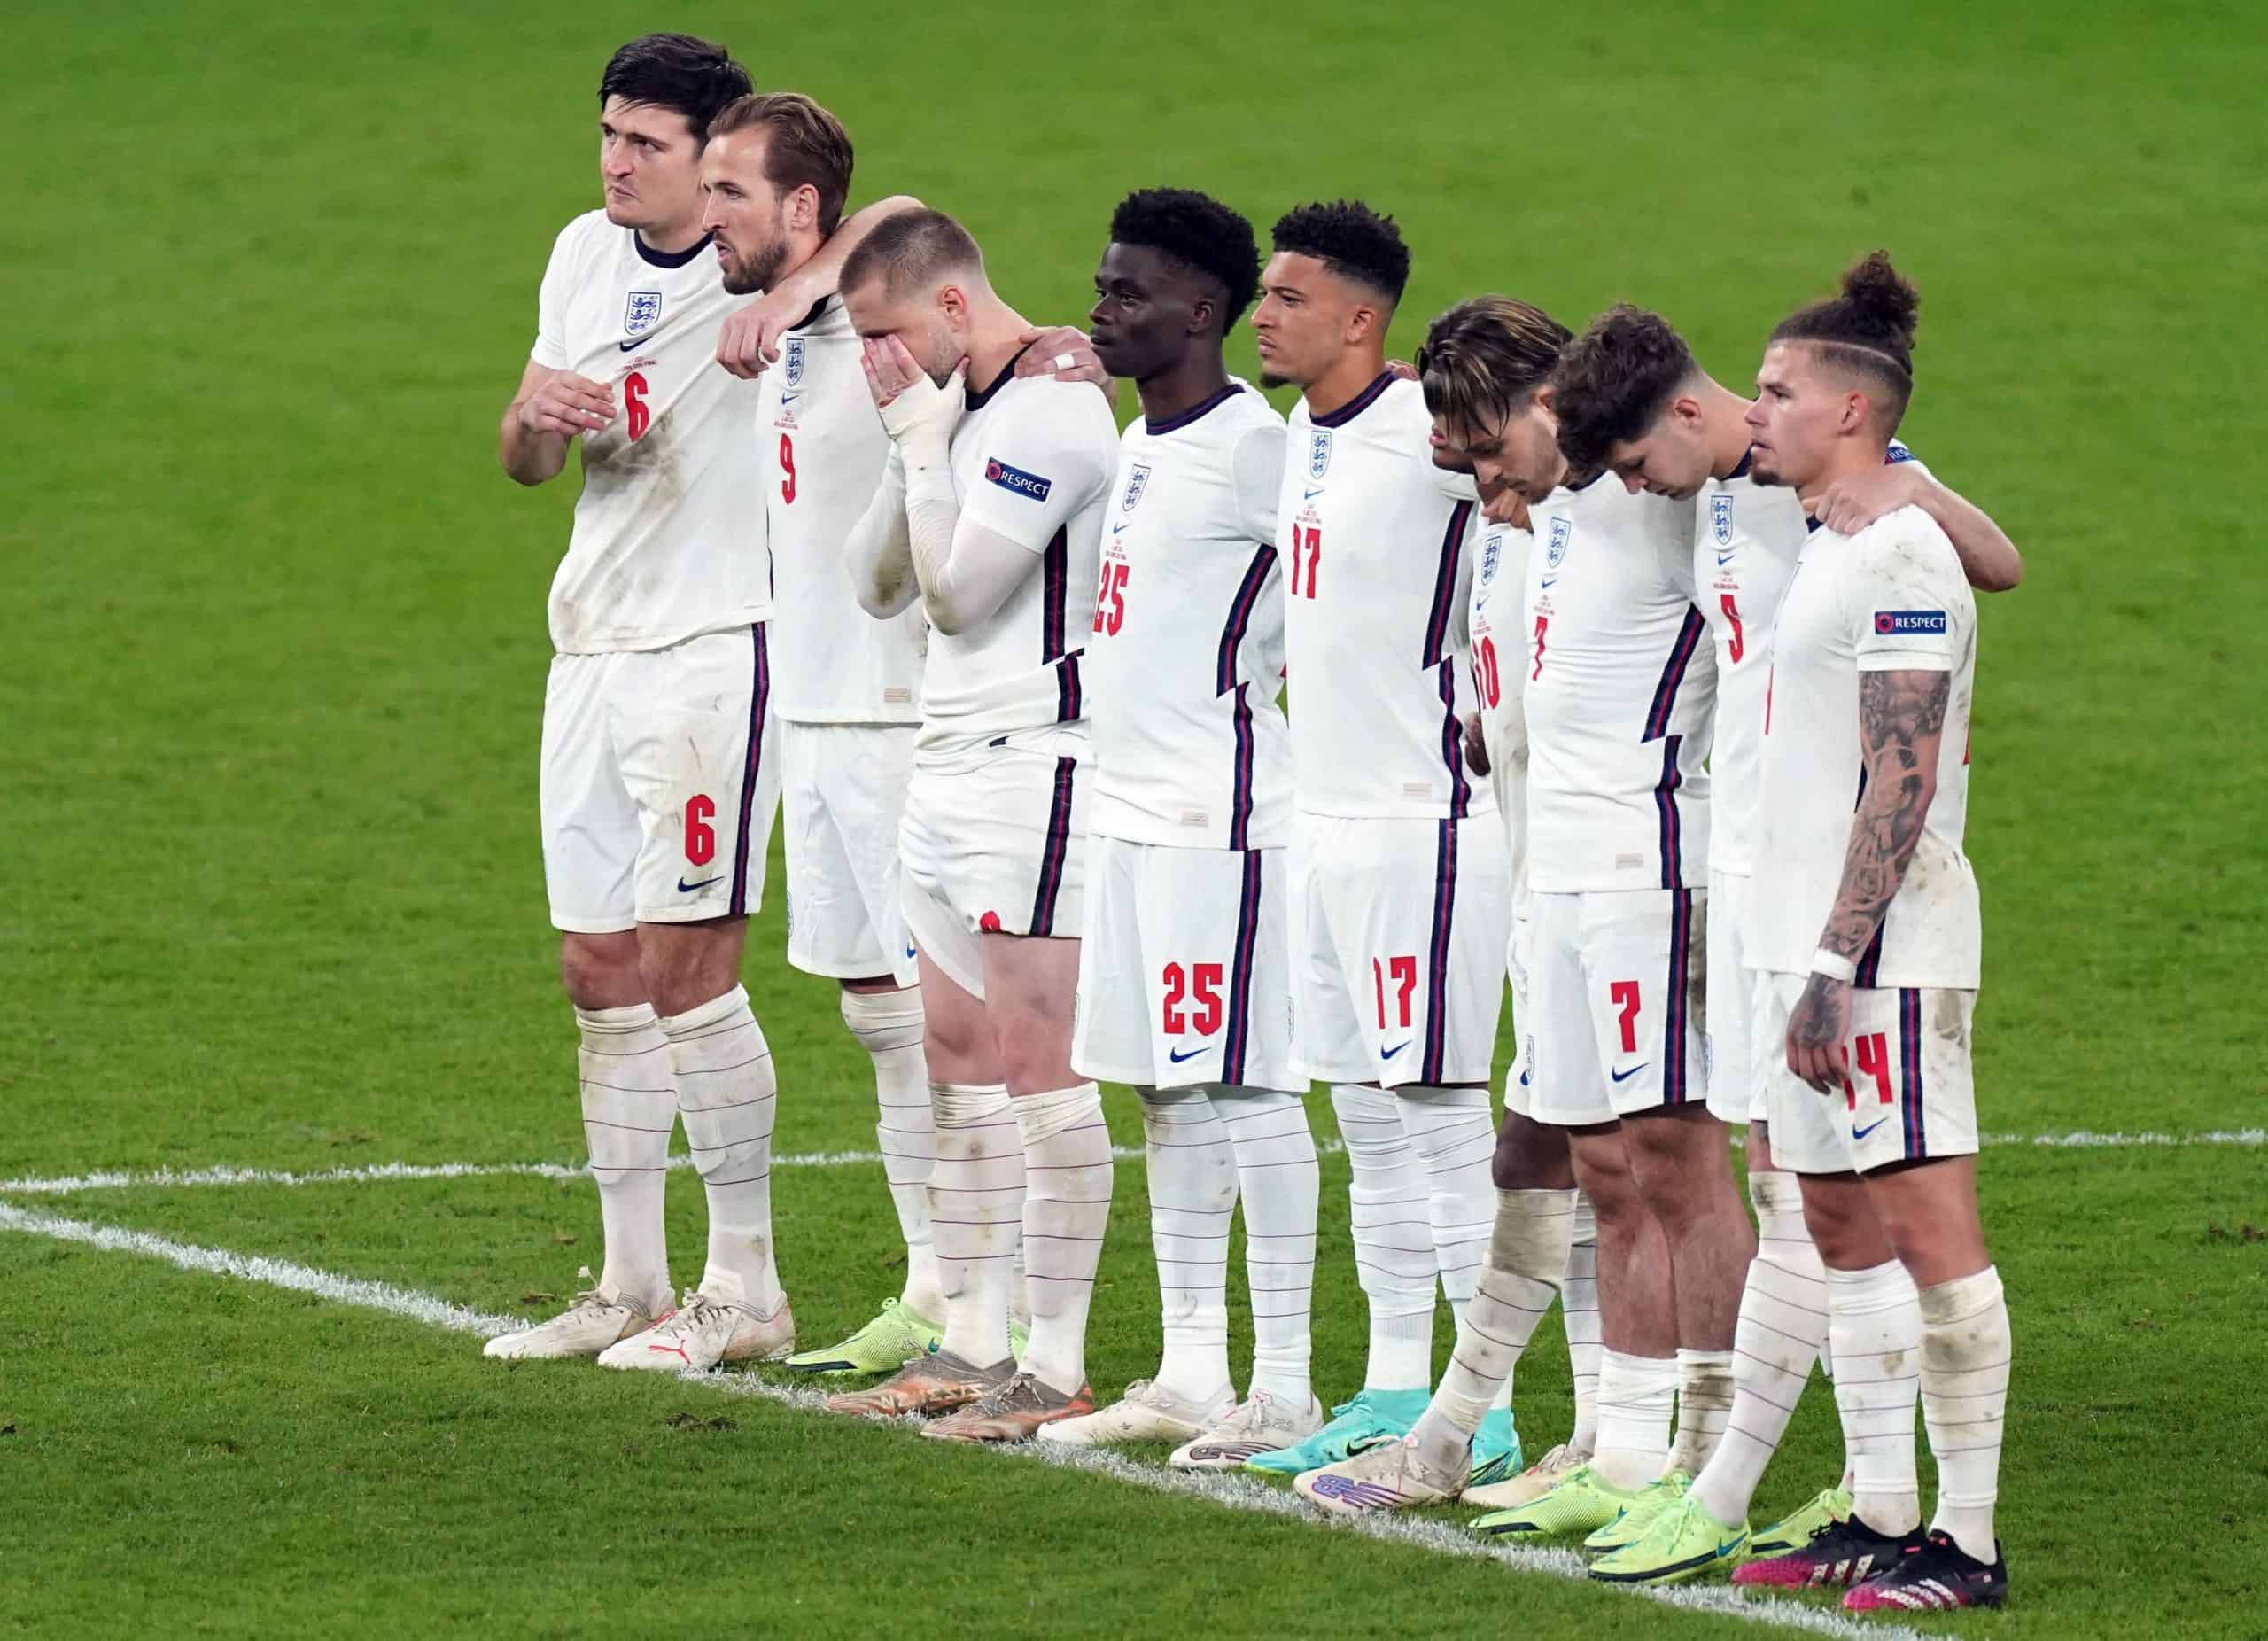 Over one million people sign petition to ban racists from football matches for life